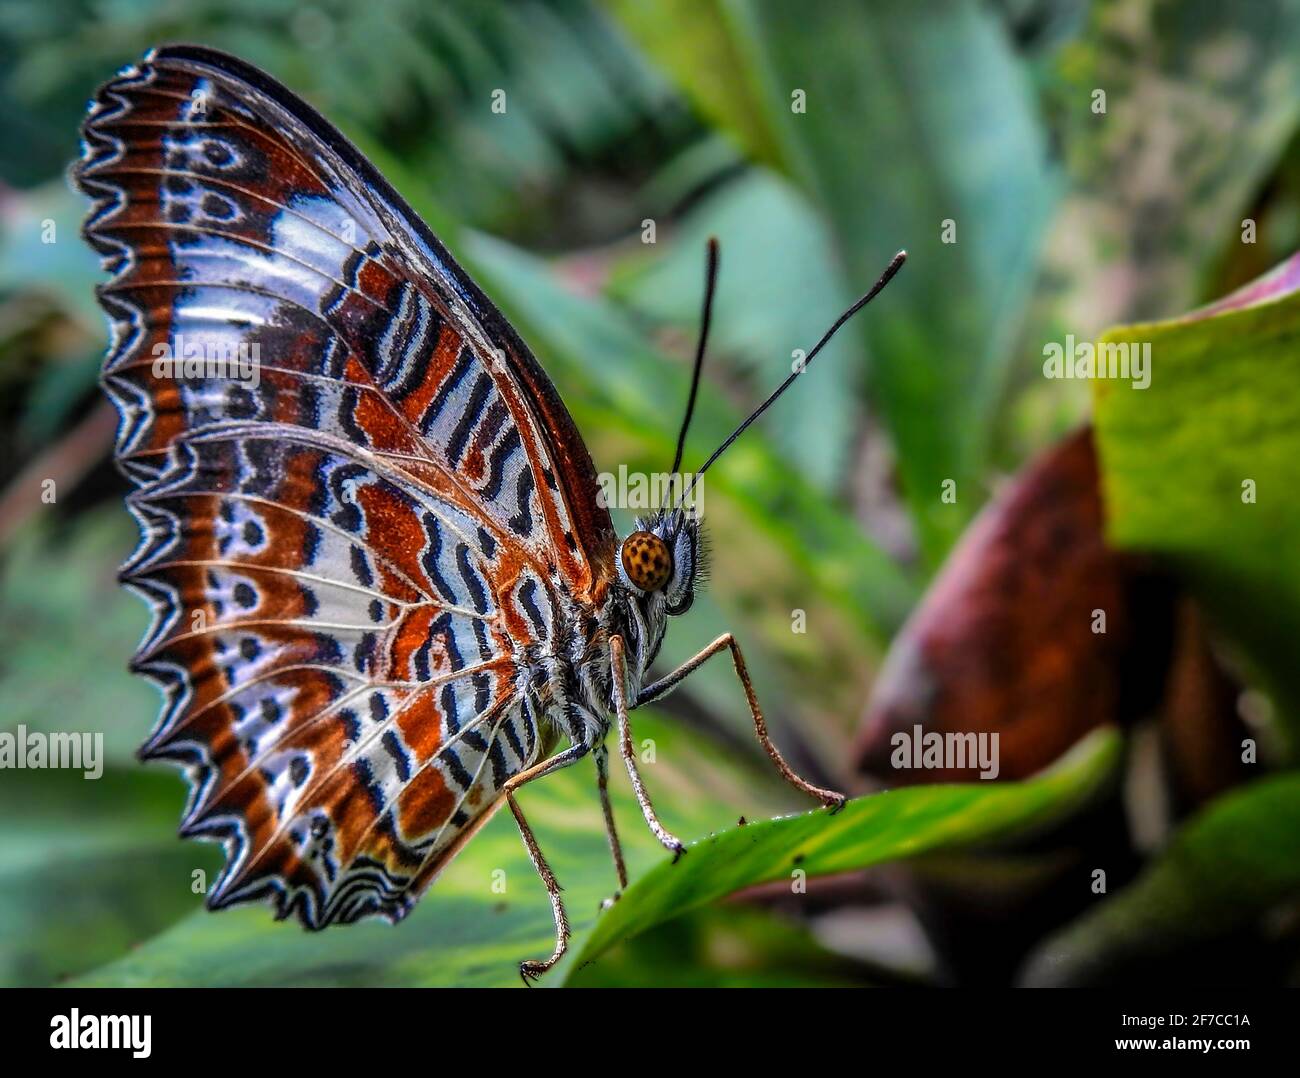 Orange Lacewing Butterfly feeding on Flower Nectar. Stock Photo